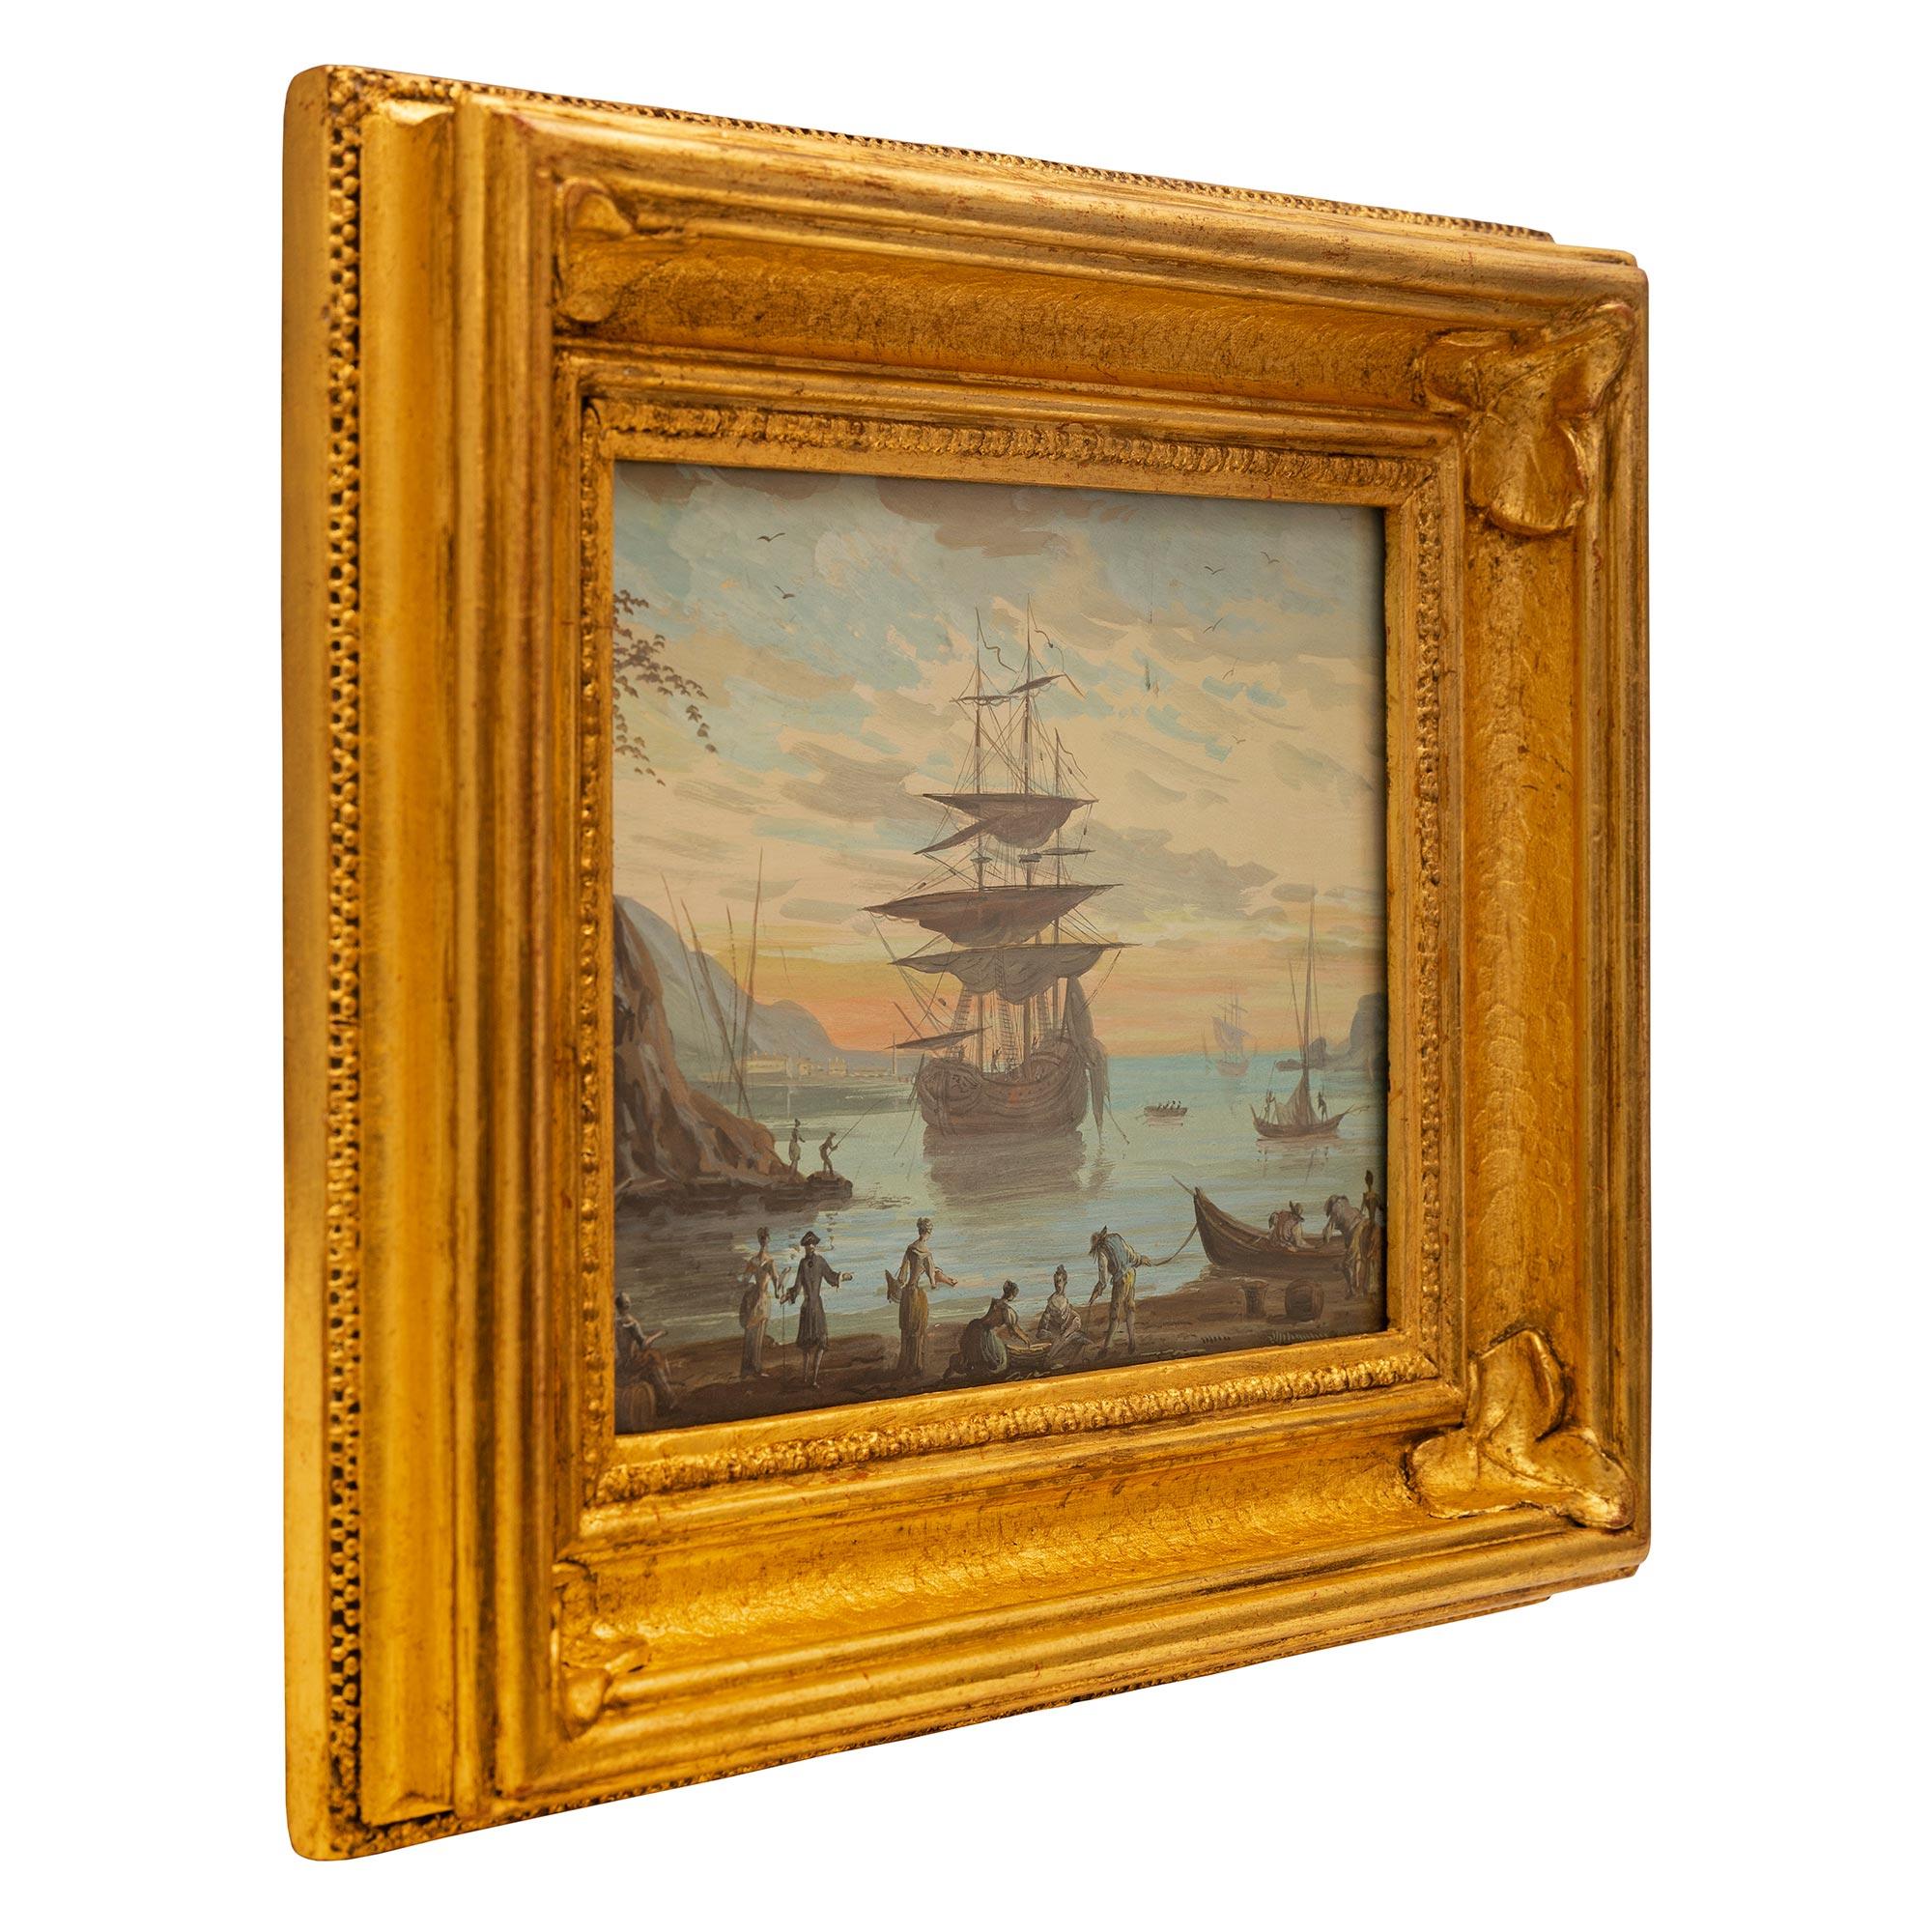 A lovely and most charming Italian 19th century watercolor painting of the bay of Venice in its original giltwood frame. The painting depicts the bay of Venice at sunrise with a beautiful red sky in the background. At the center is a most impressive